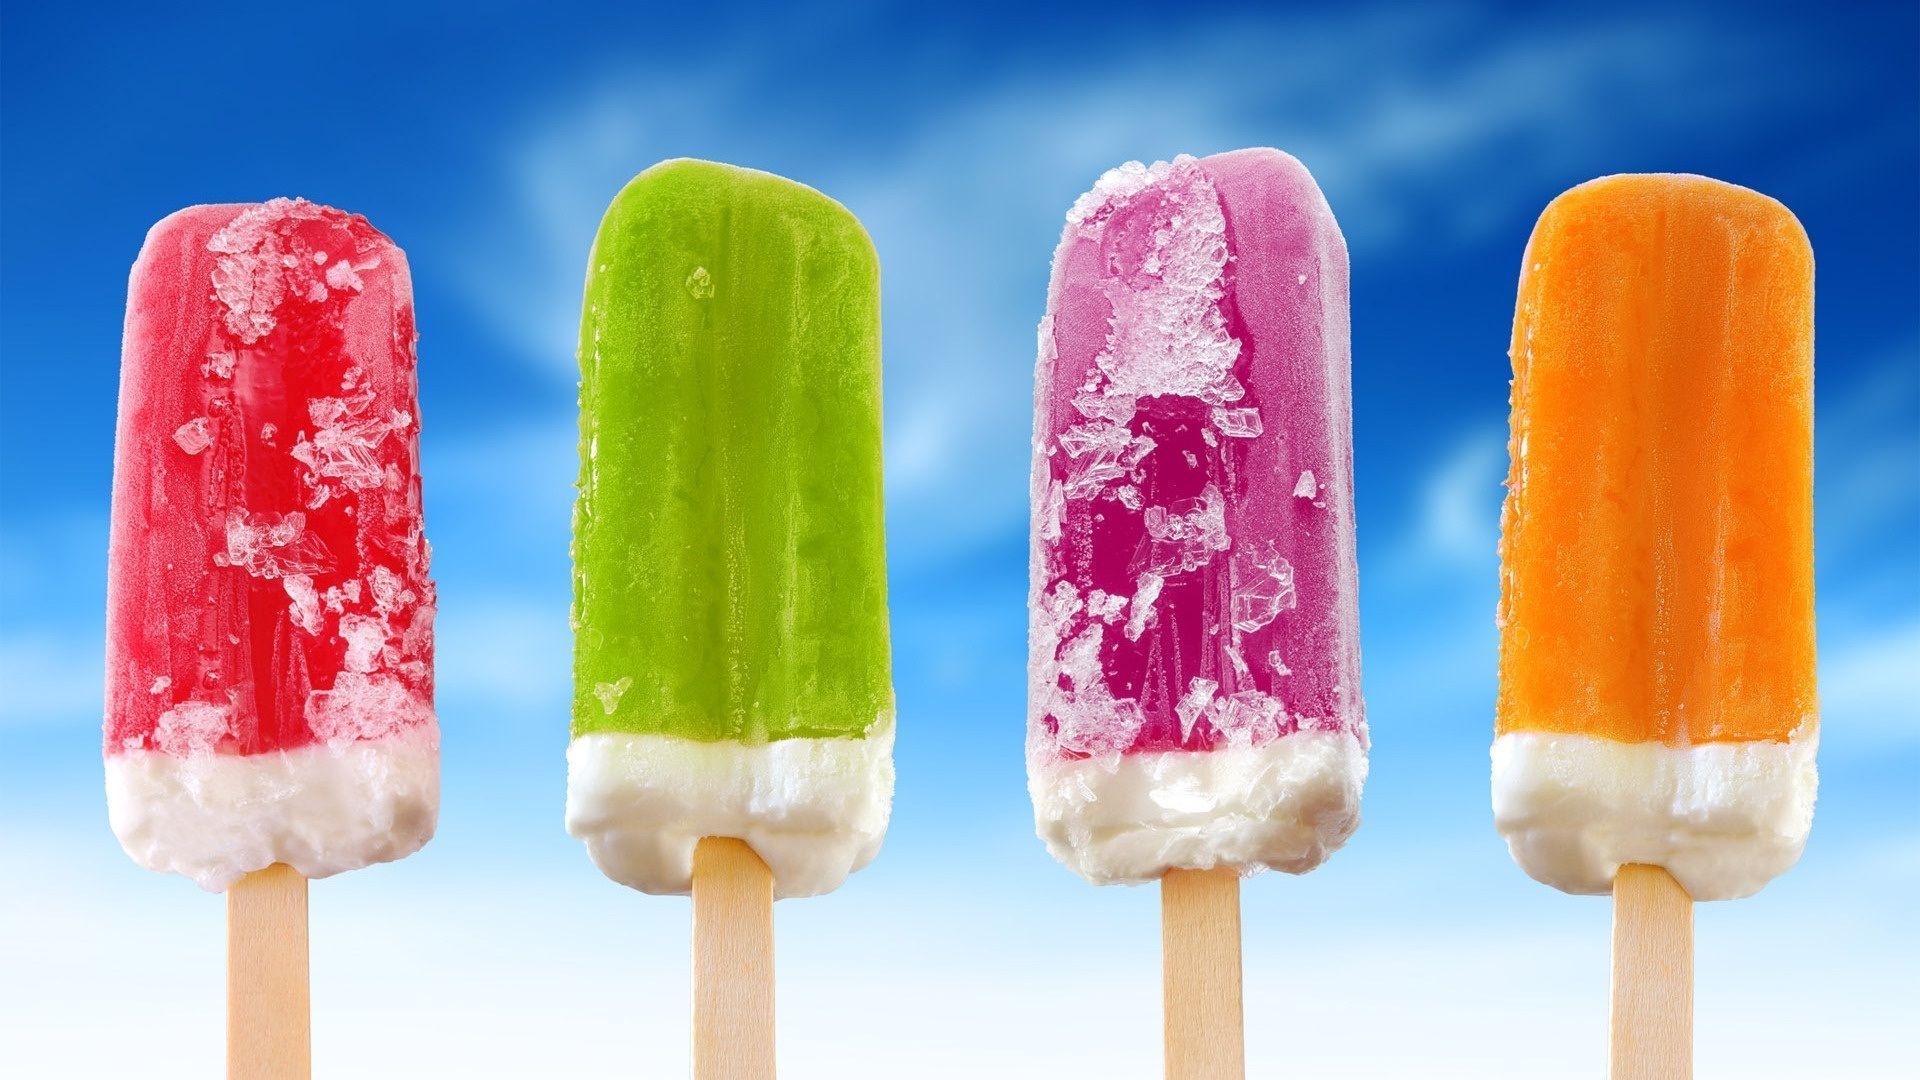 Colorful ice candy for summer HD wallpaper | HD Wallpapers Rocks